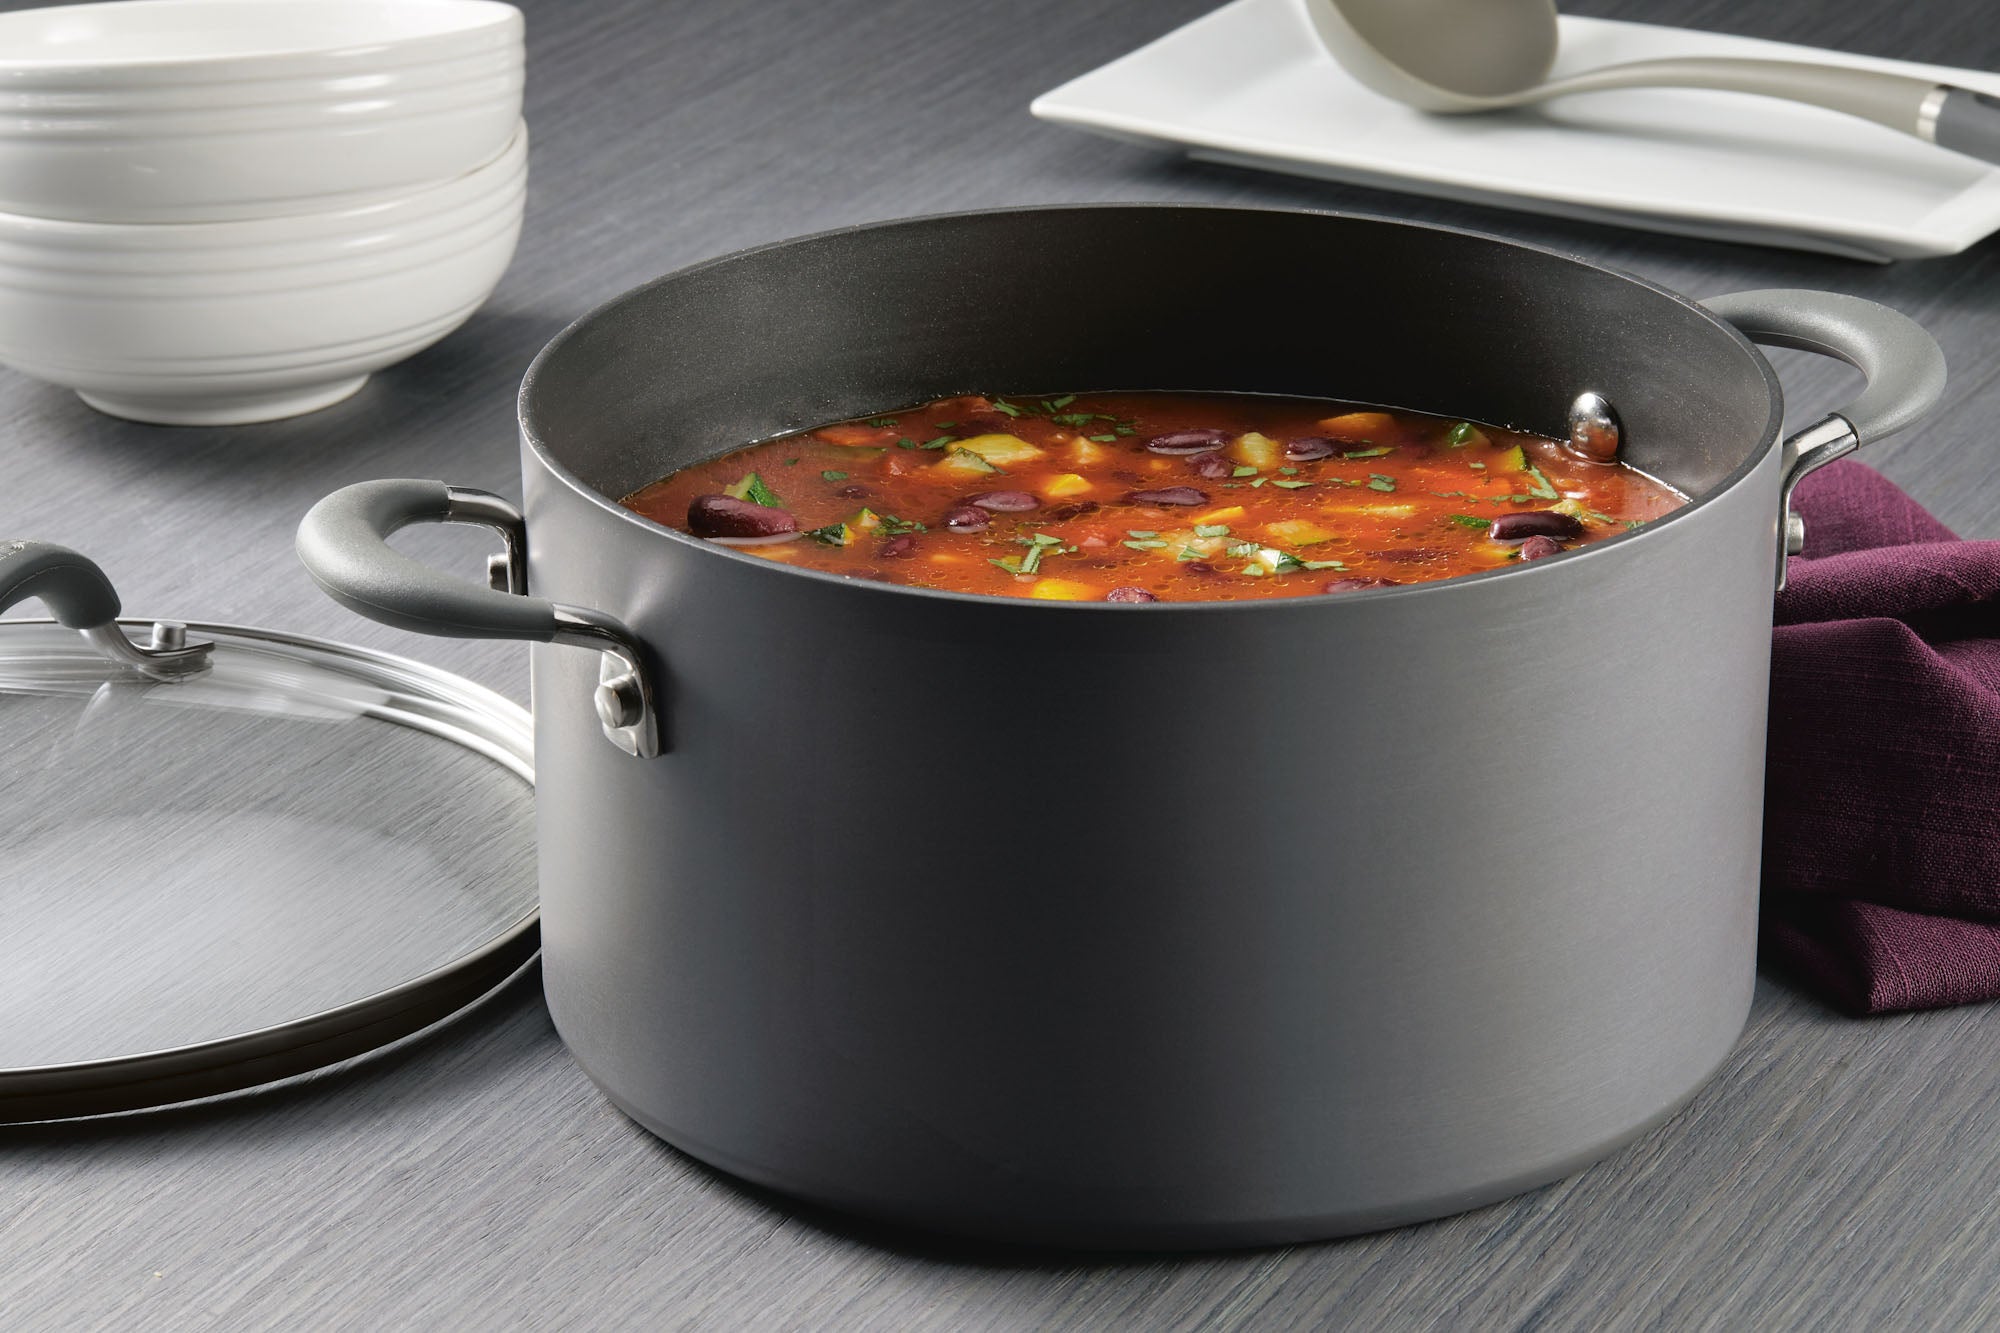 Stockpot with soup